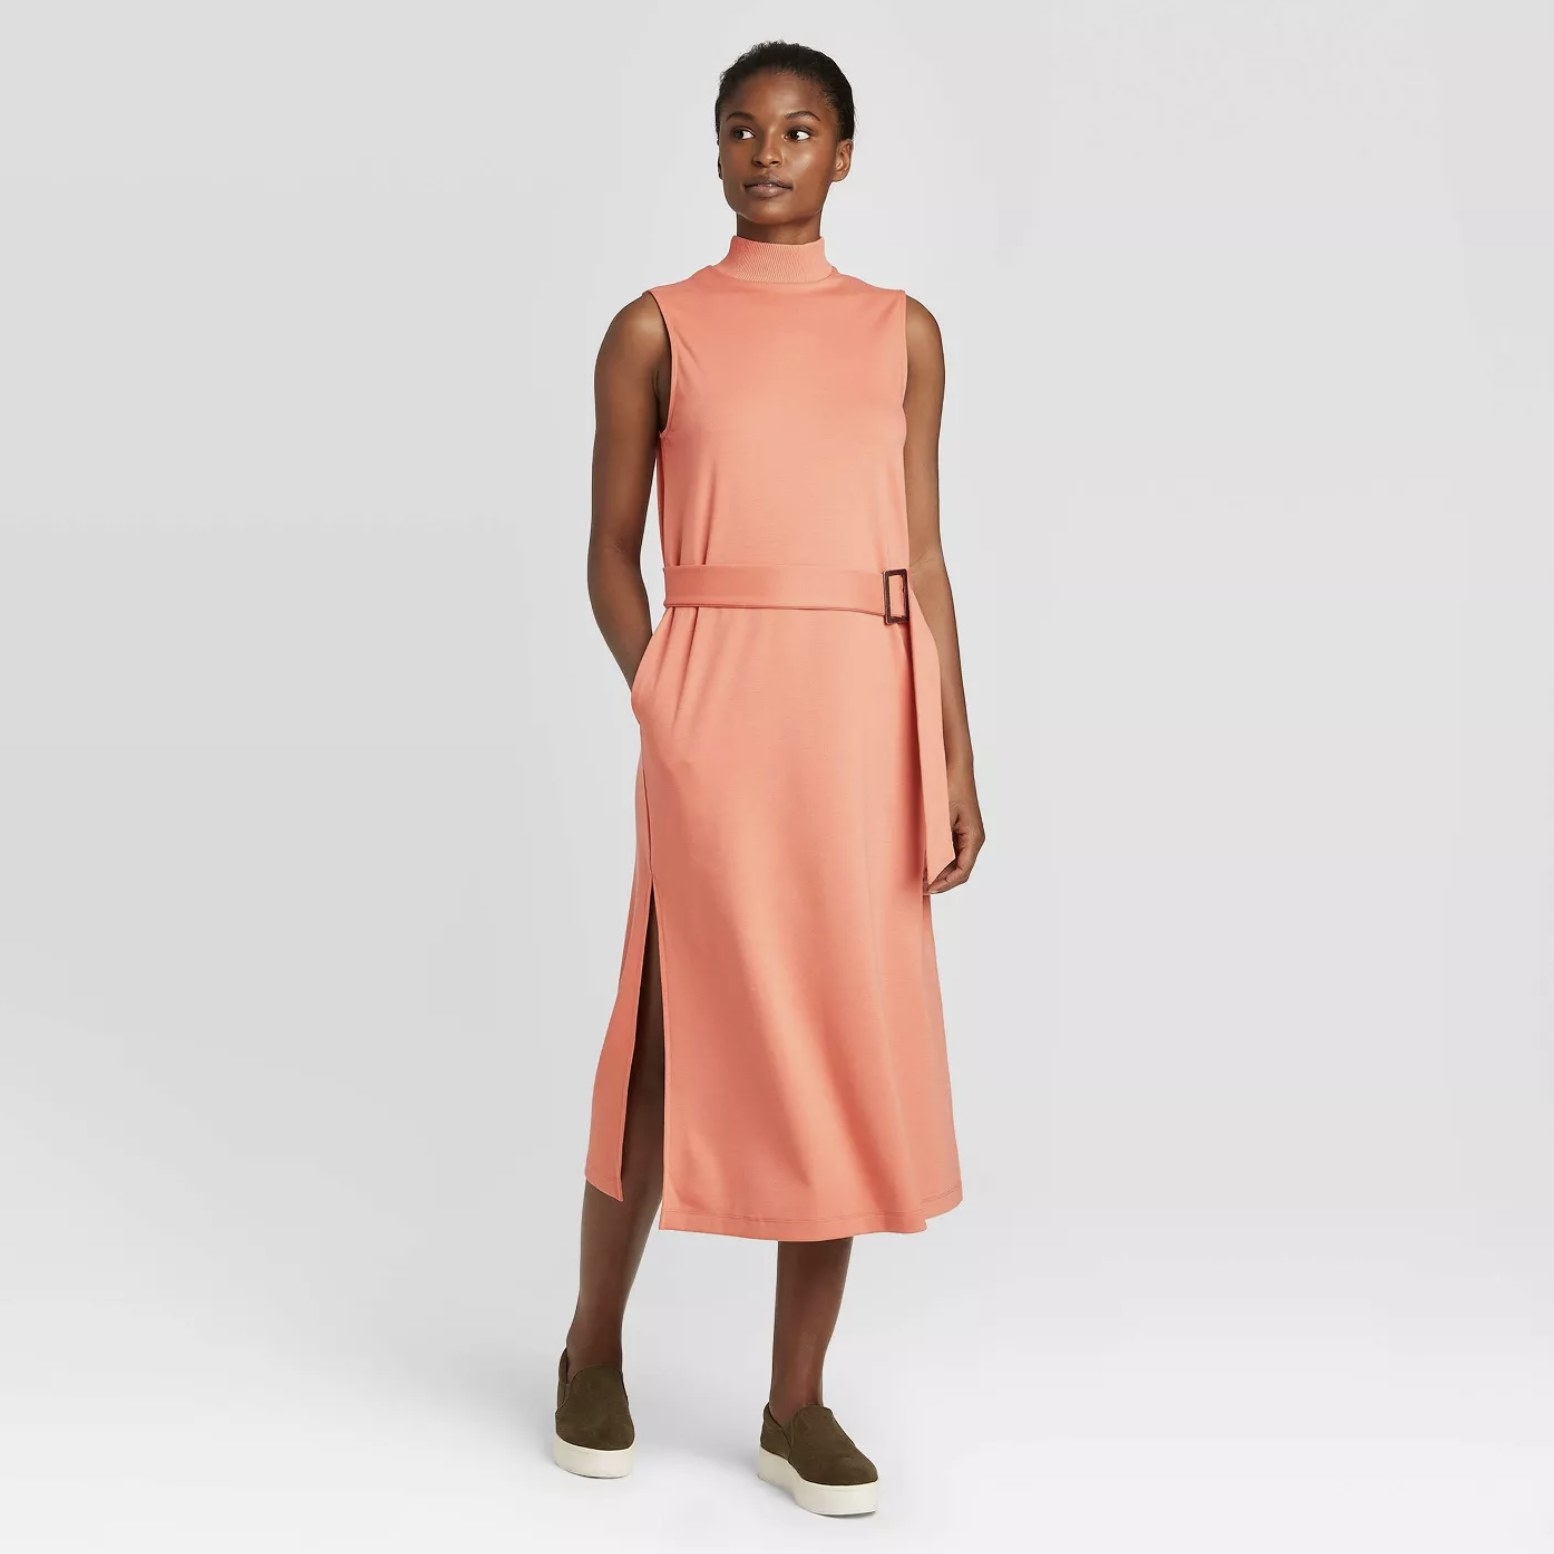 Model is wearing a coral sleeveless midi dress with a turtleneck and slits on the sides of the bottom with black slip-on shoes